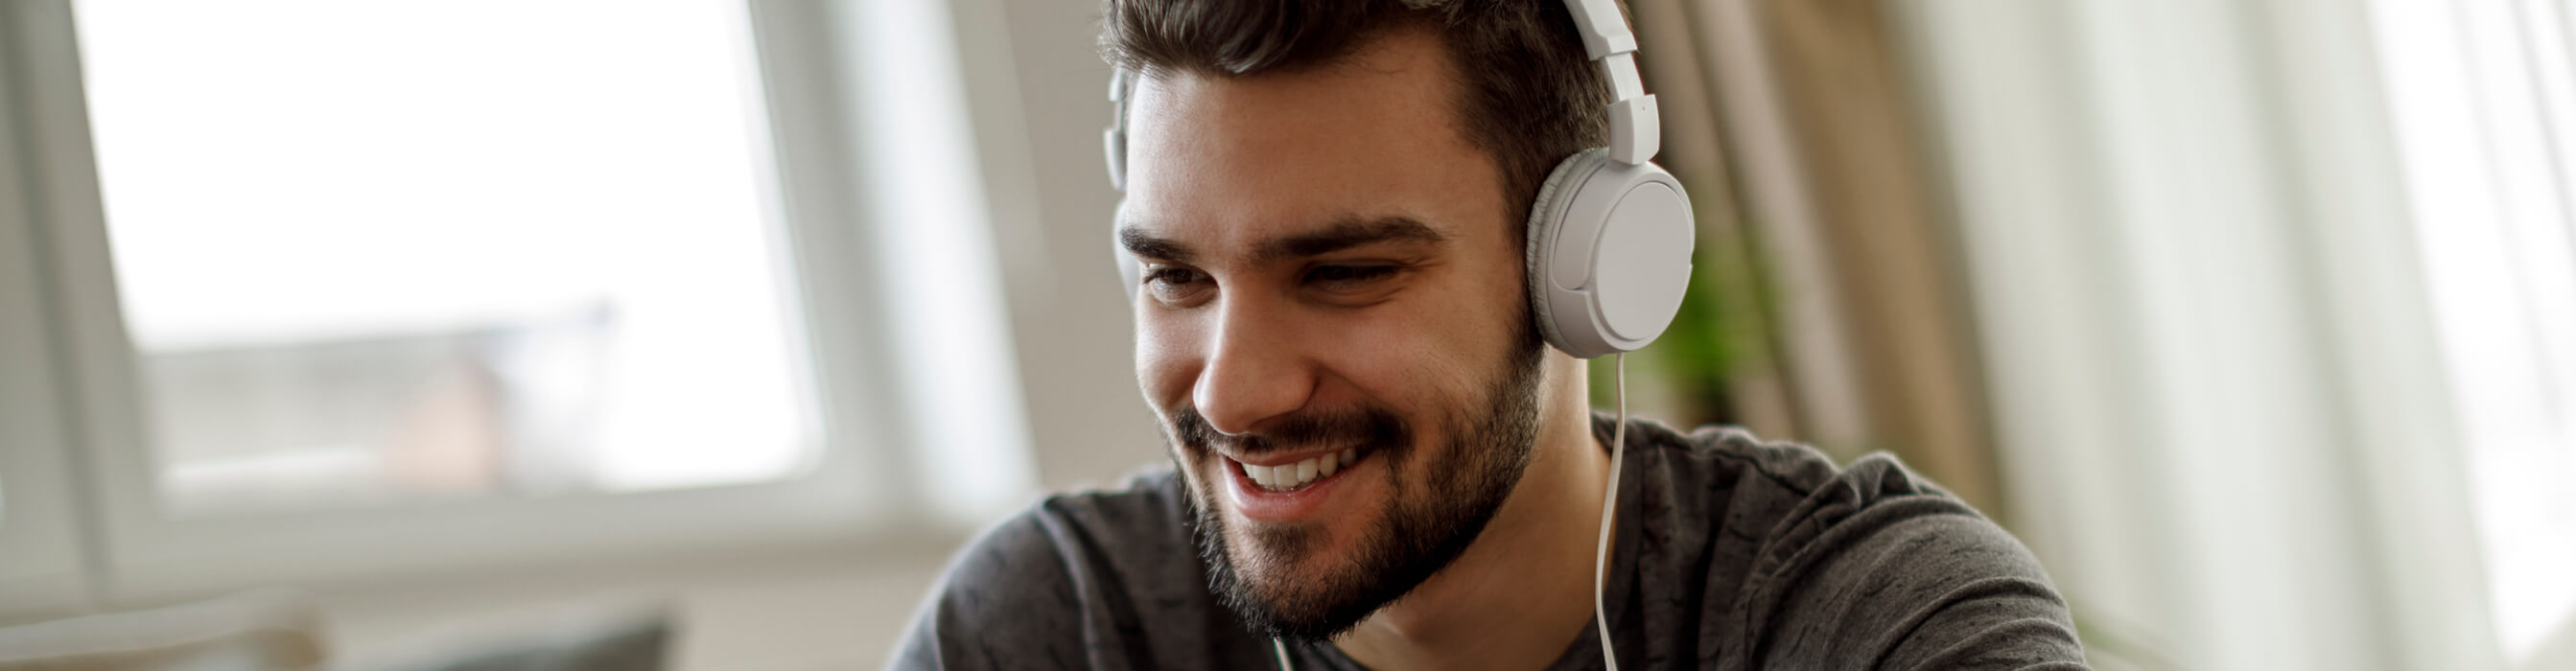 A man smiles with headphones on